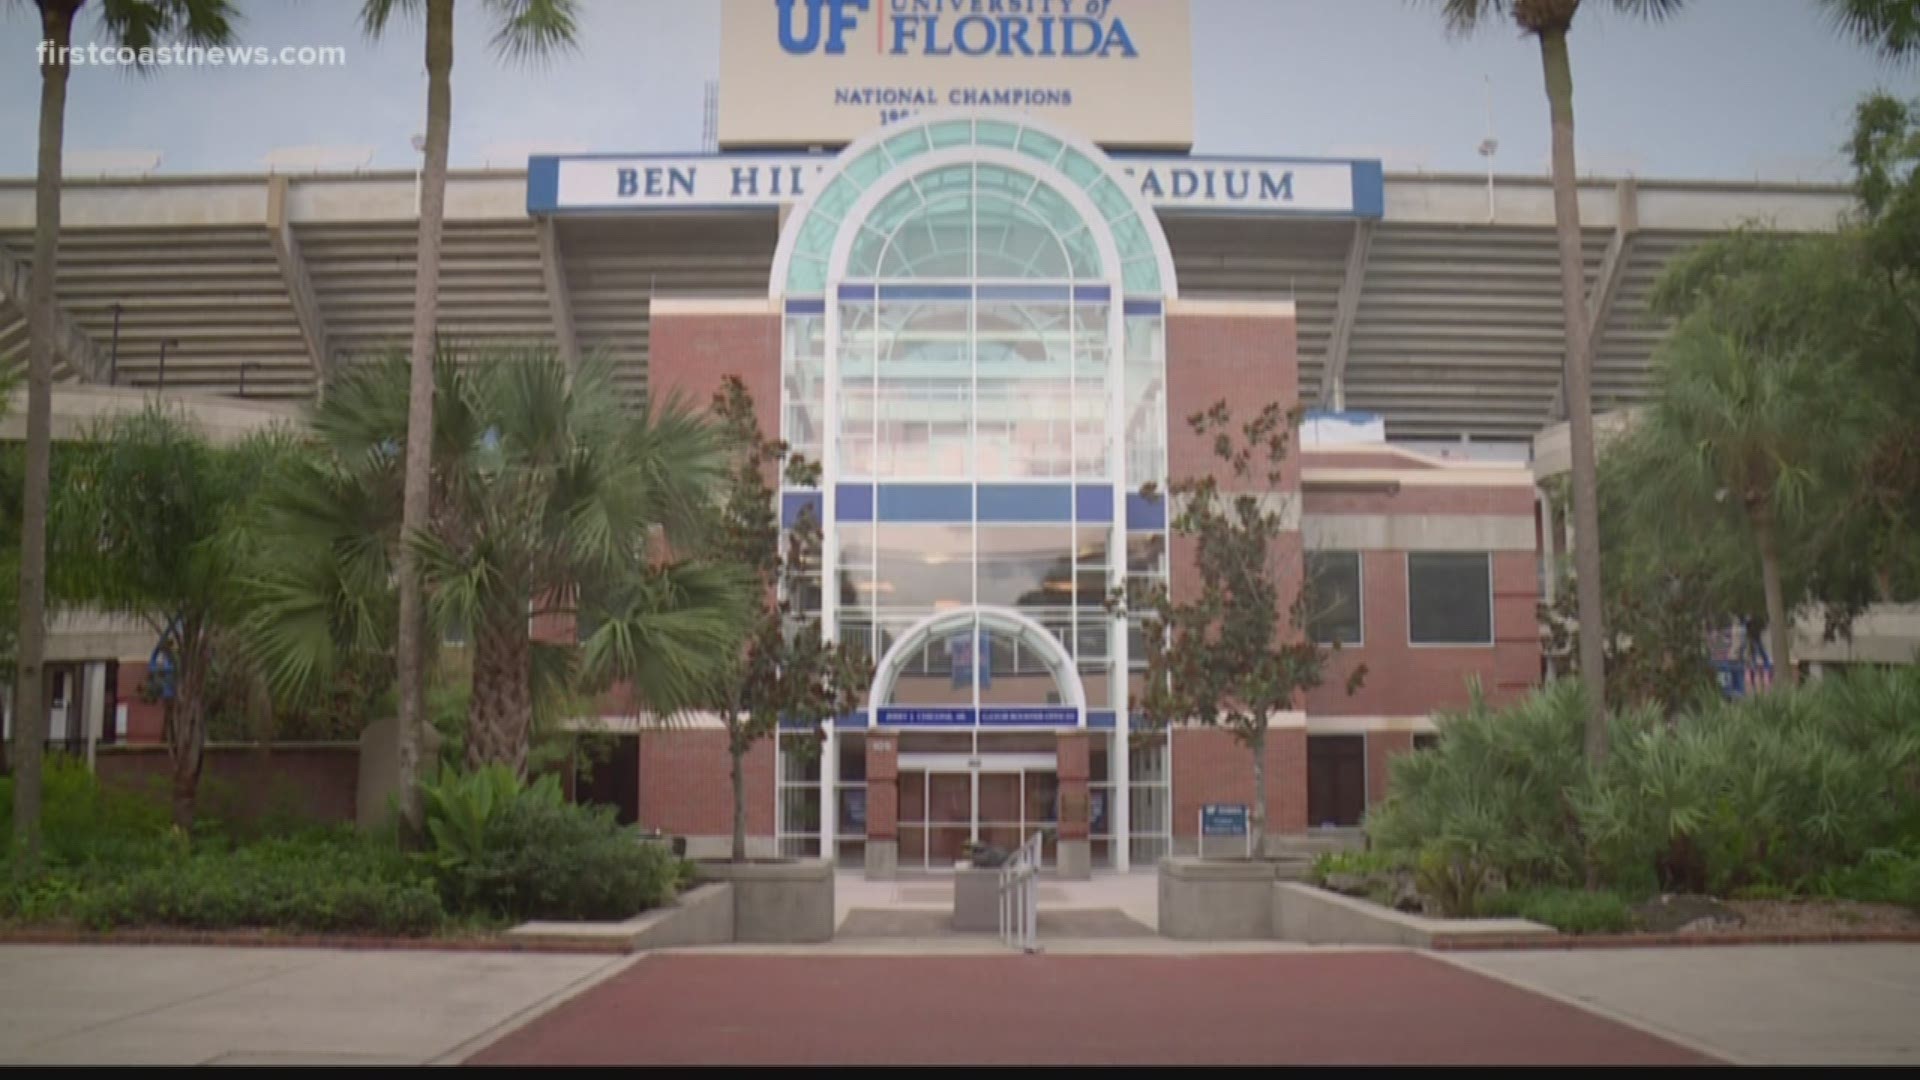 The report says an alleged gambler told police he had a good relationship with C'yontai Lewis and another University of Florida football player. He said he gave them discounts on rental cars at Enterprise, according to the report.